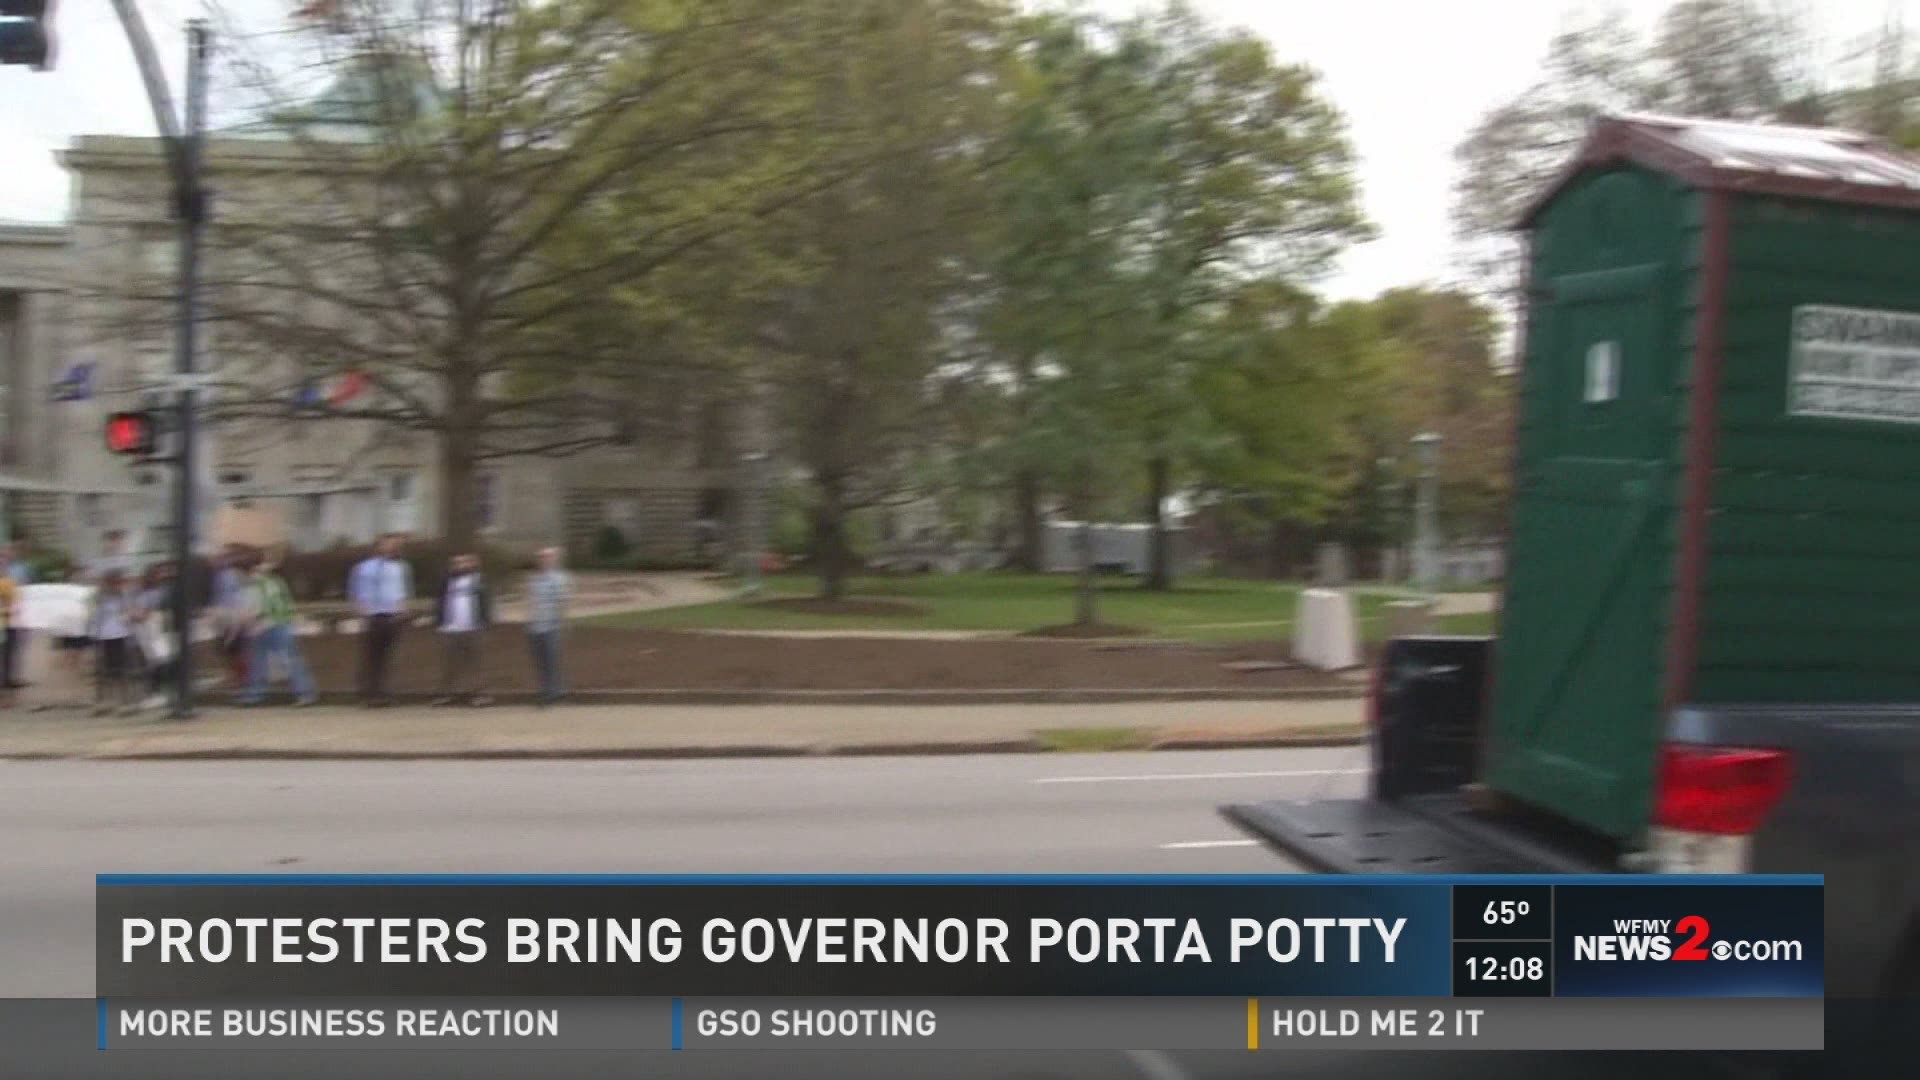 Friday a social media discussion about North Caroina's 'Bathroom Bill' led to delivery of a Porta John to the State Capitol for Gov. Pat McCrory